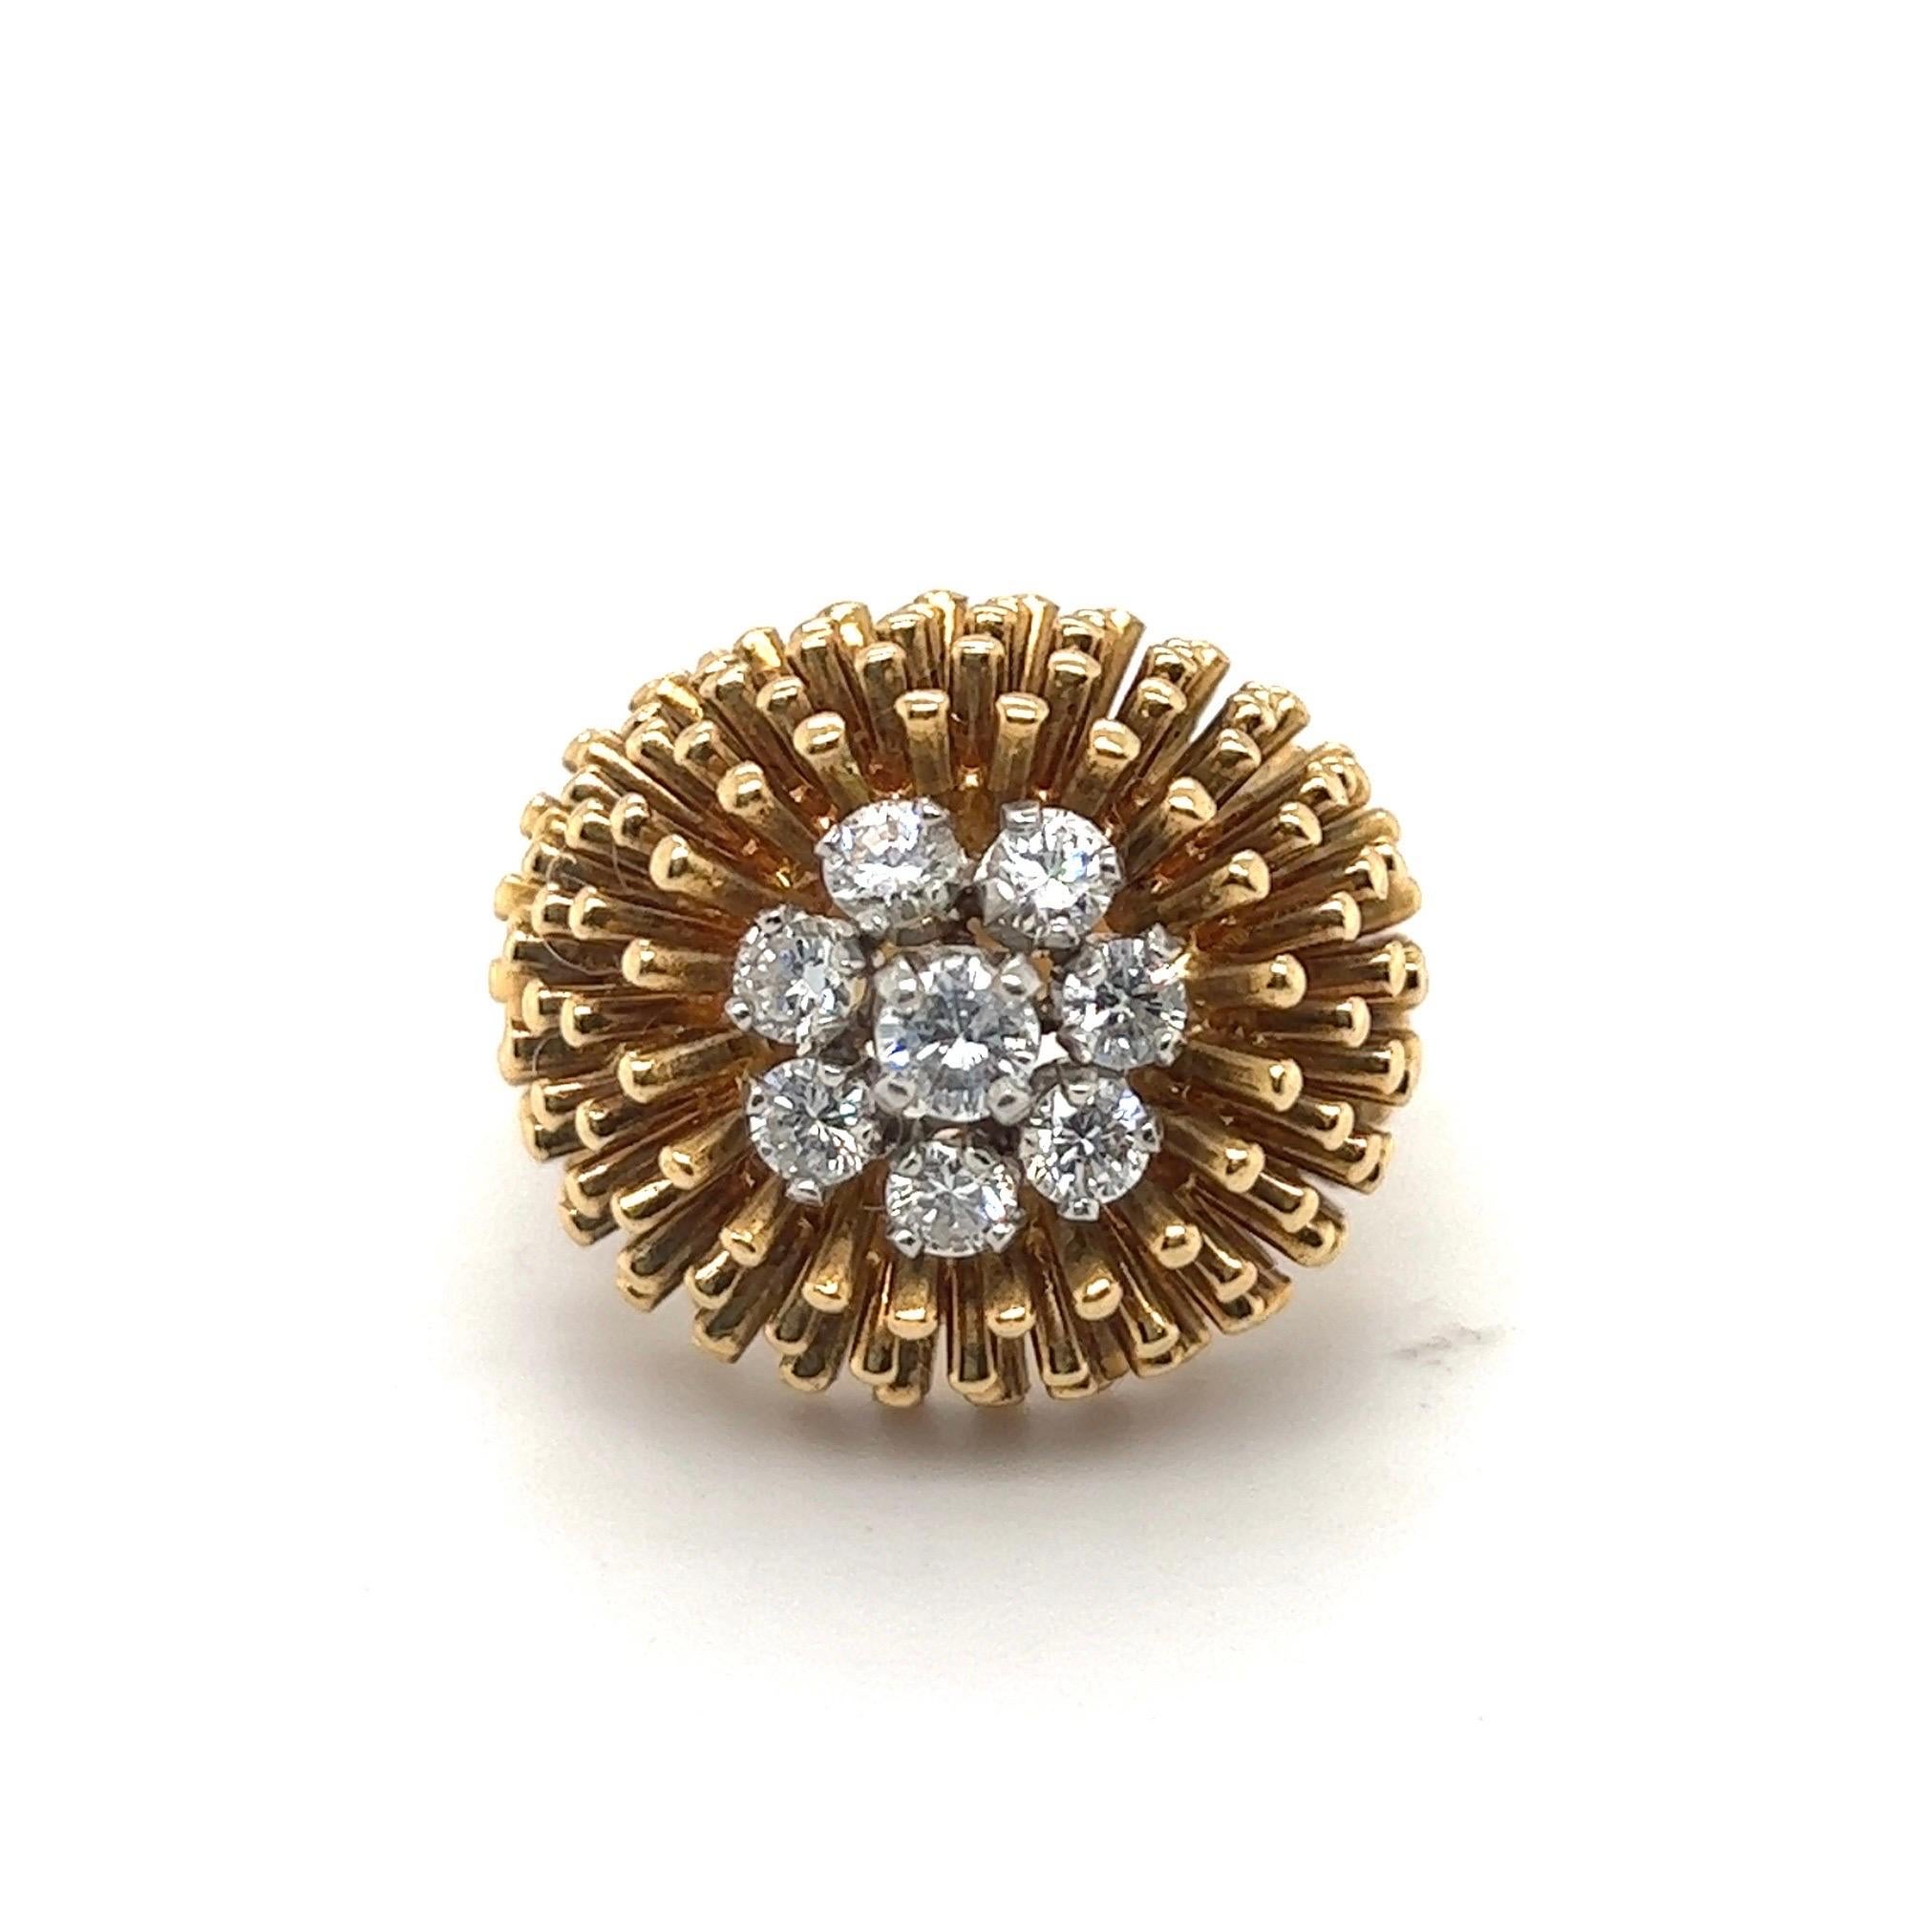 Striking 18 karat yellow gold and diamonds cocktail ring by Kutchinsky, London, 1965.
Designed as a blooming cactus, the flower set with 8 brilliant-cut diamonds totalling circa 0.65 carats, to a surround of radiating gold batons.
This ravishing